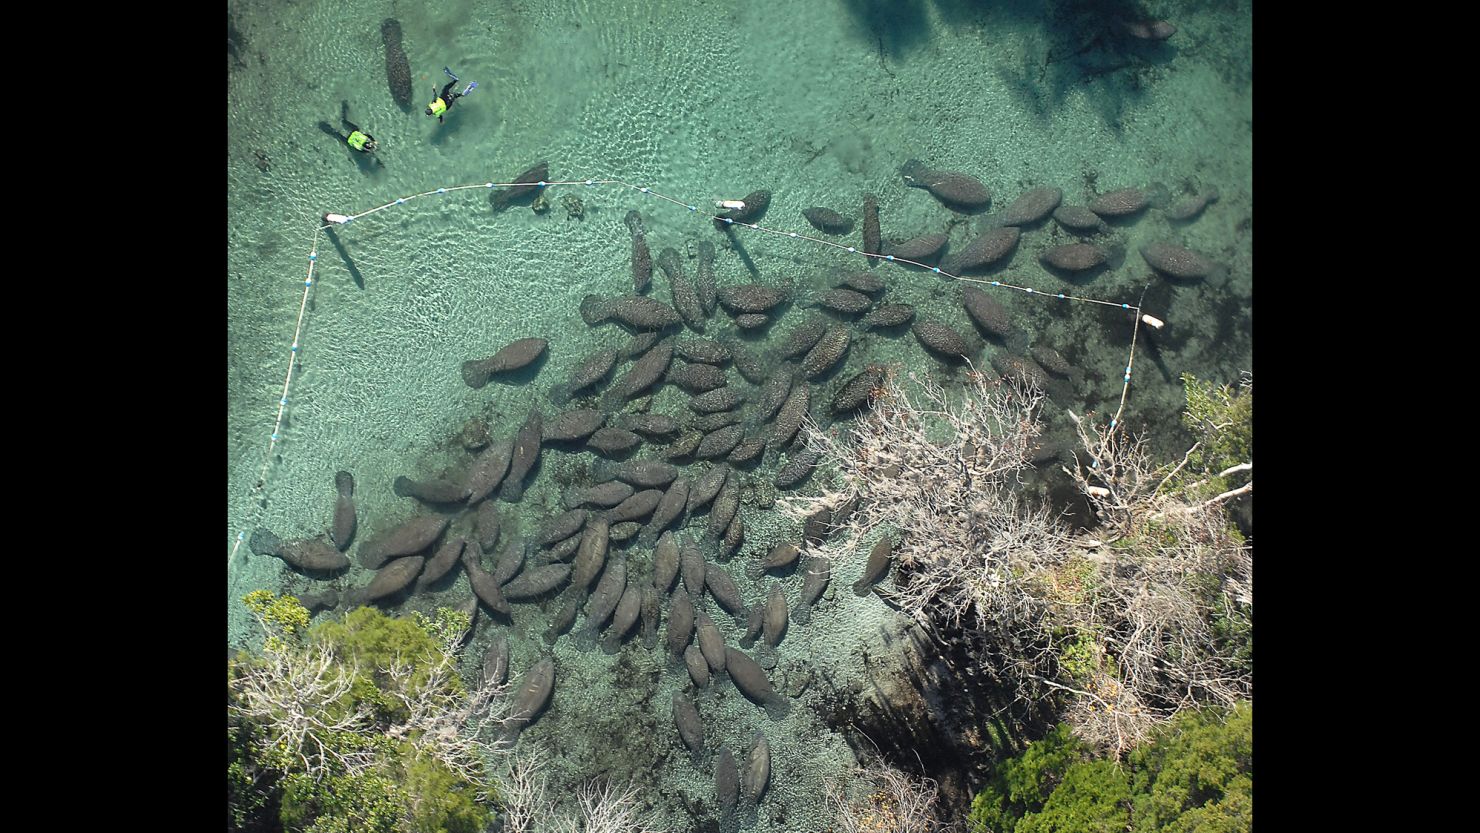 Many manatees like to winter at Three Sisters Springs on the Crystal River north of Tampa, Florida.